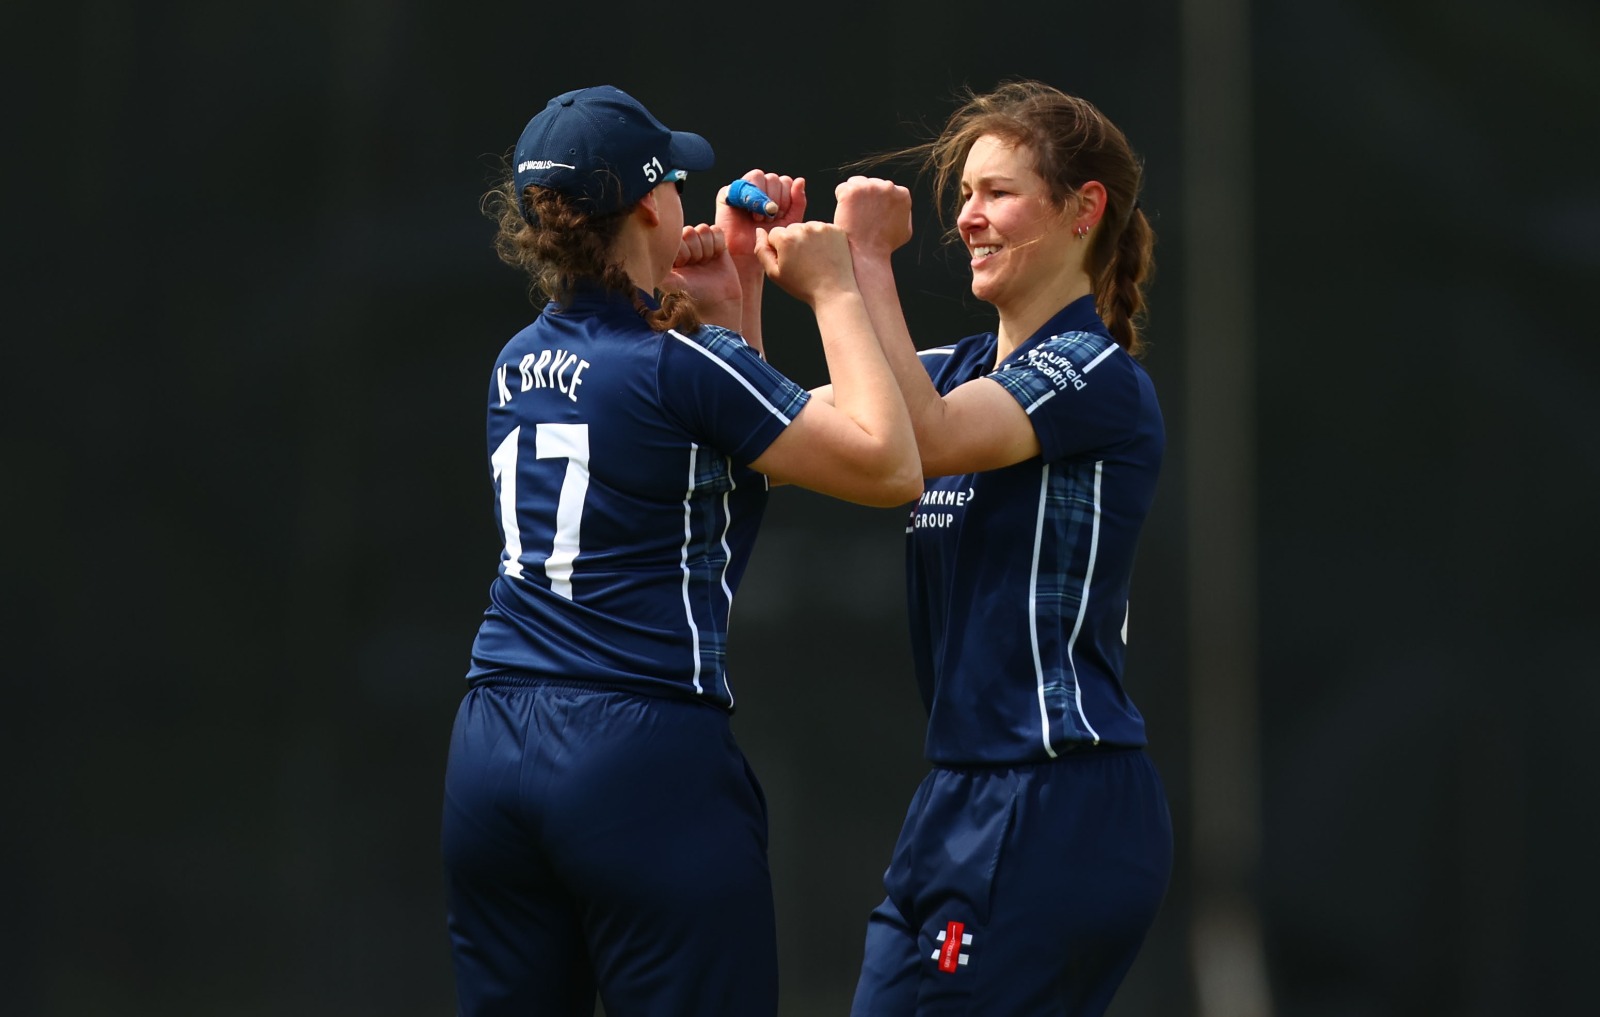 Scotland Women fall to defeat against Ireland in second game of Celtic International T20 Challenge